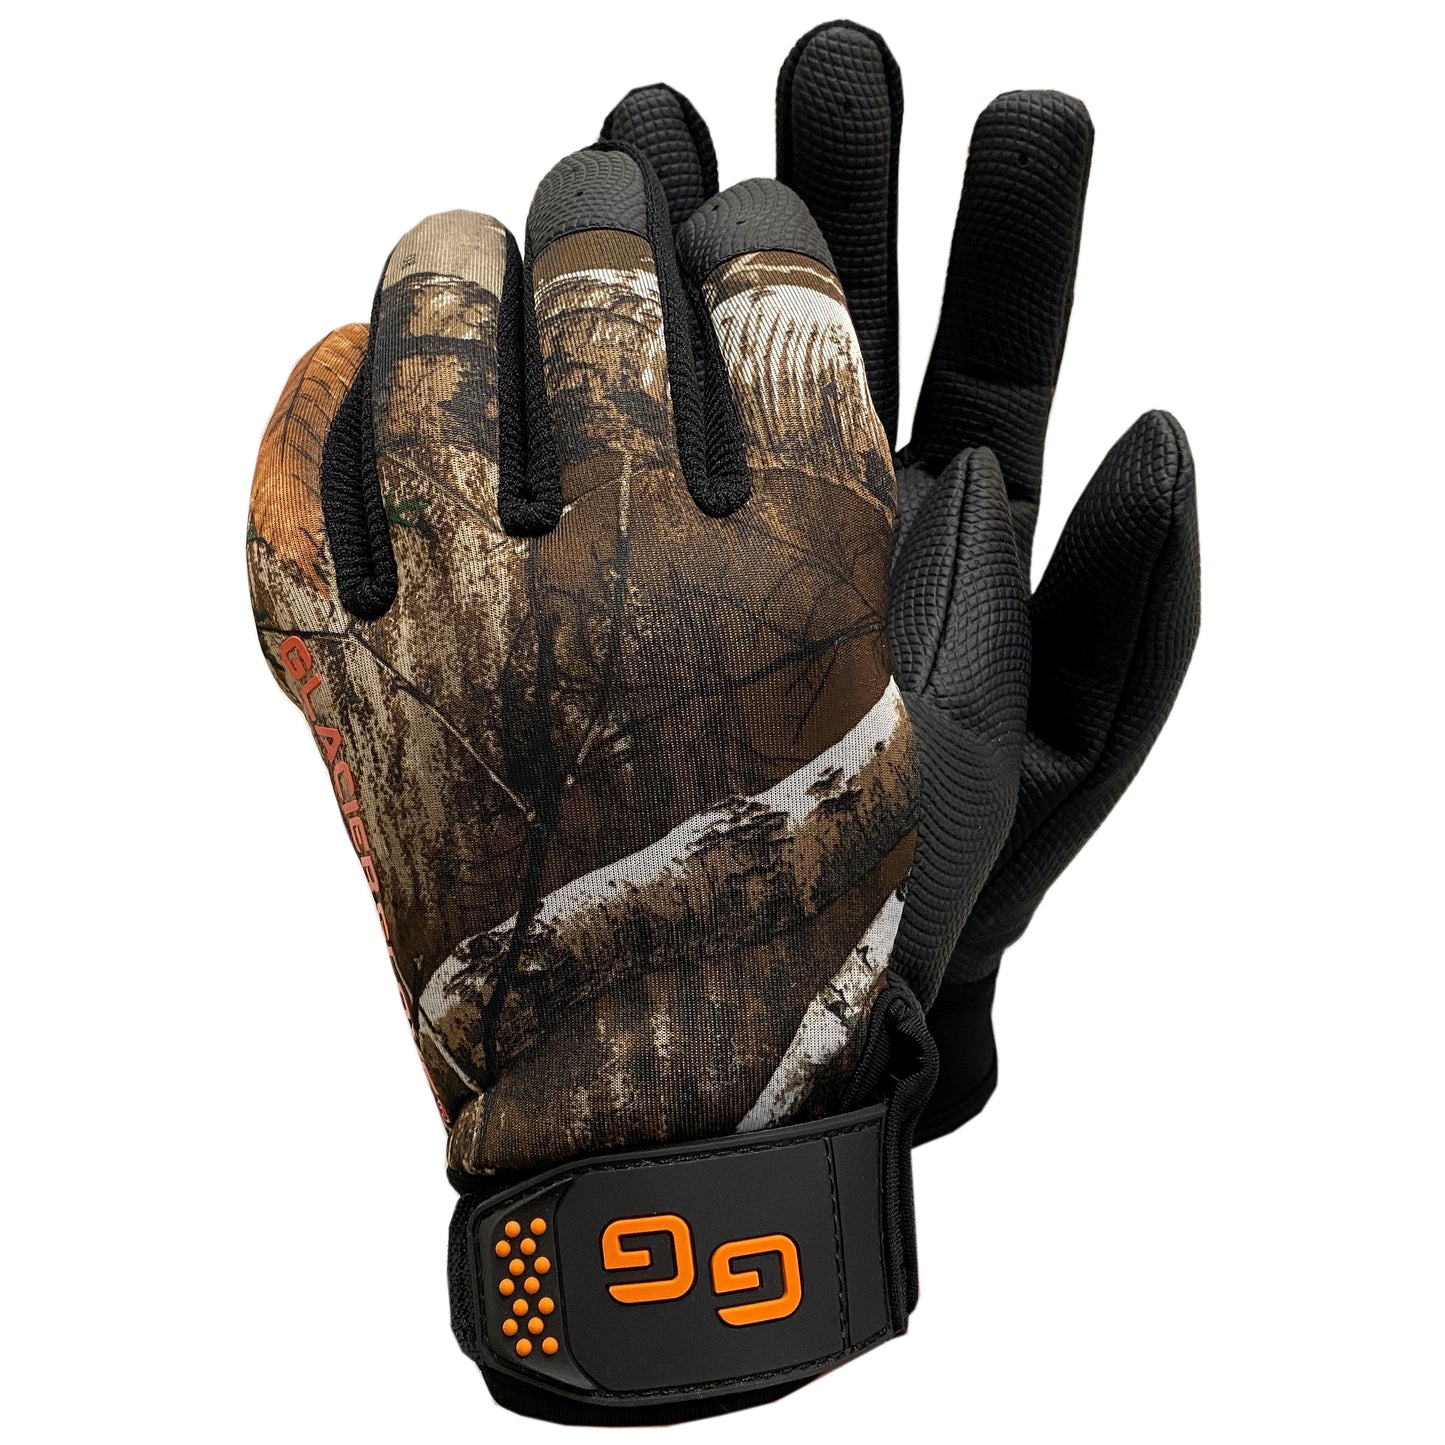 The Elite Shooting glove is designed to keep your hands warm and protected while providing great dexterity for any of your hunting adventures.